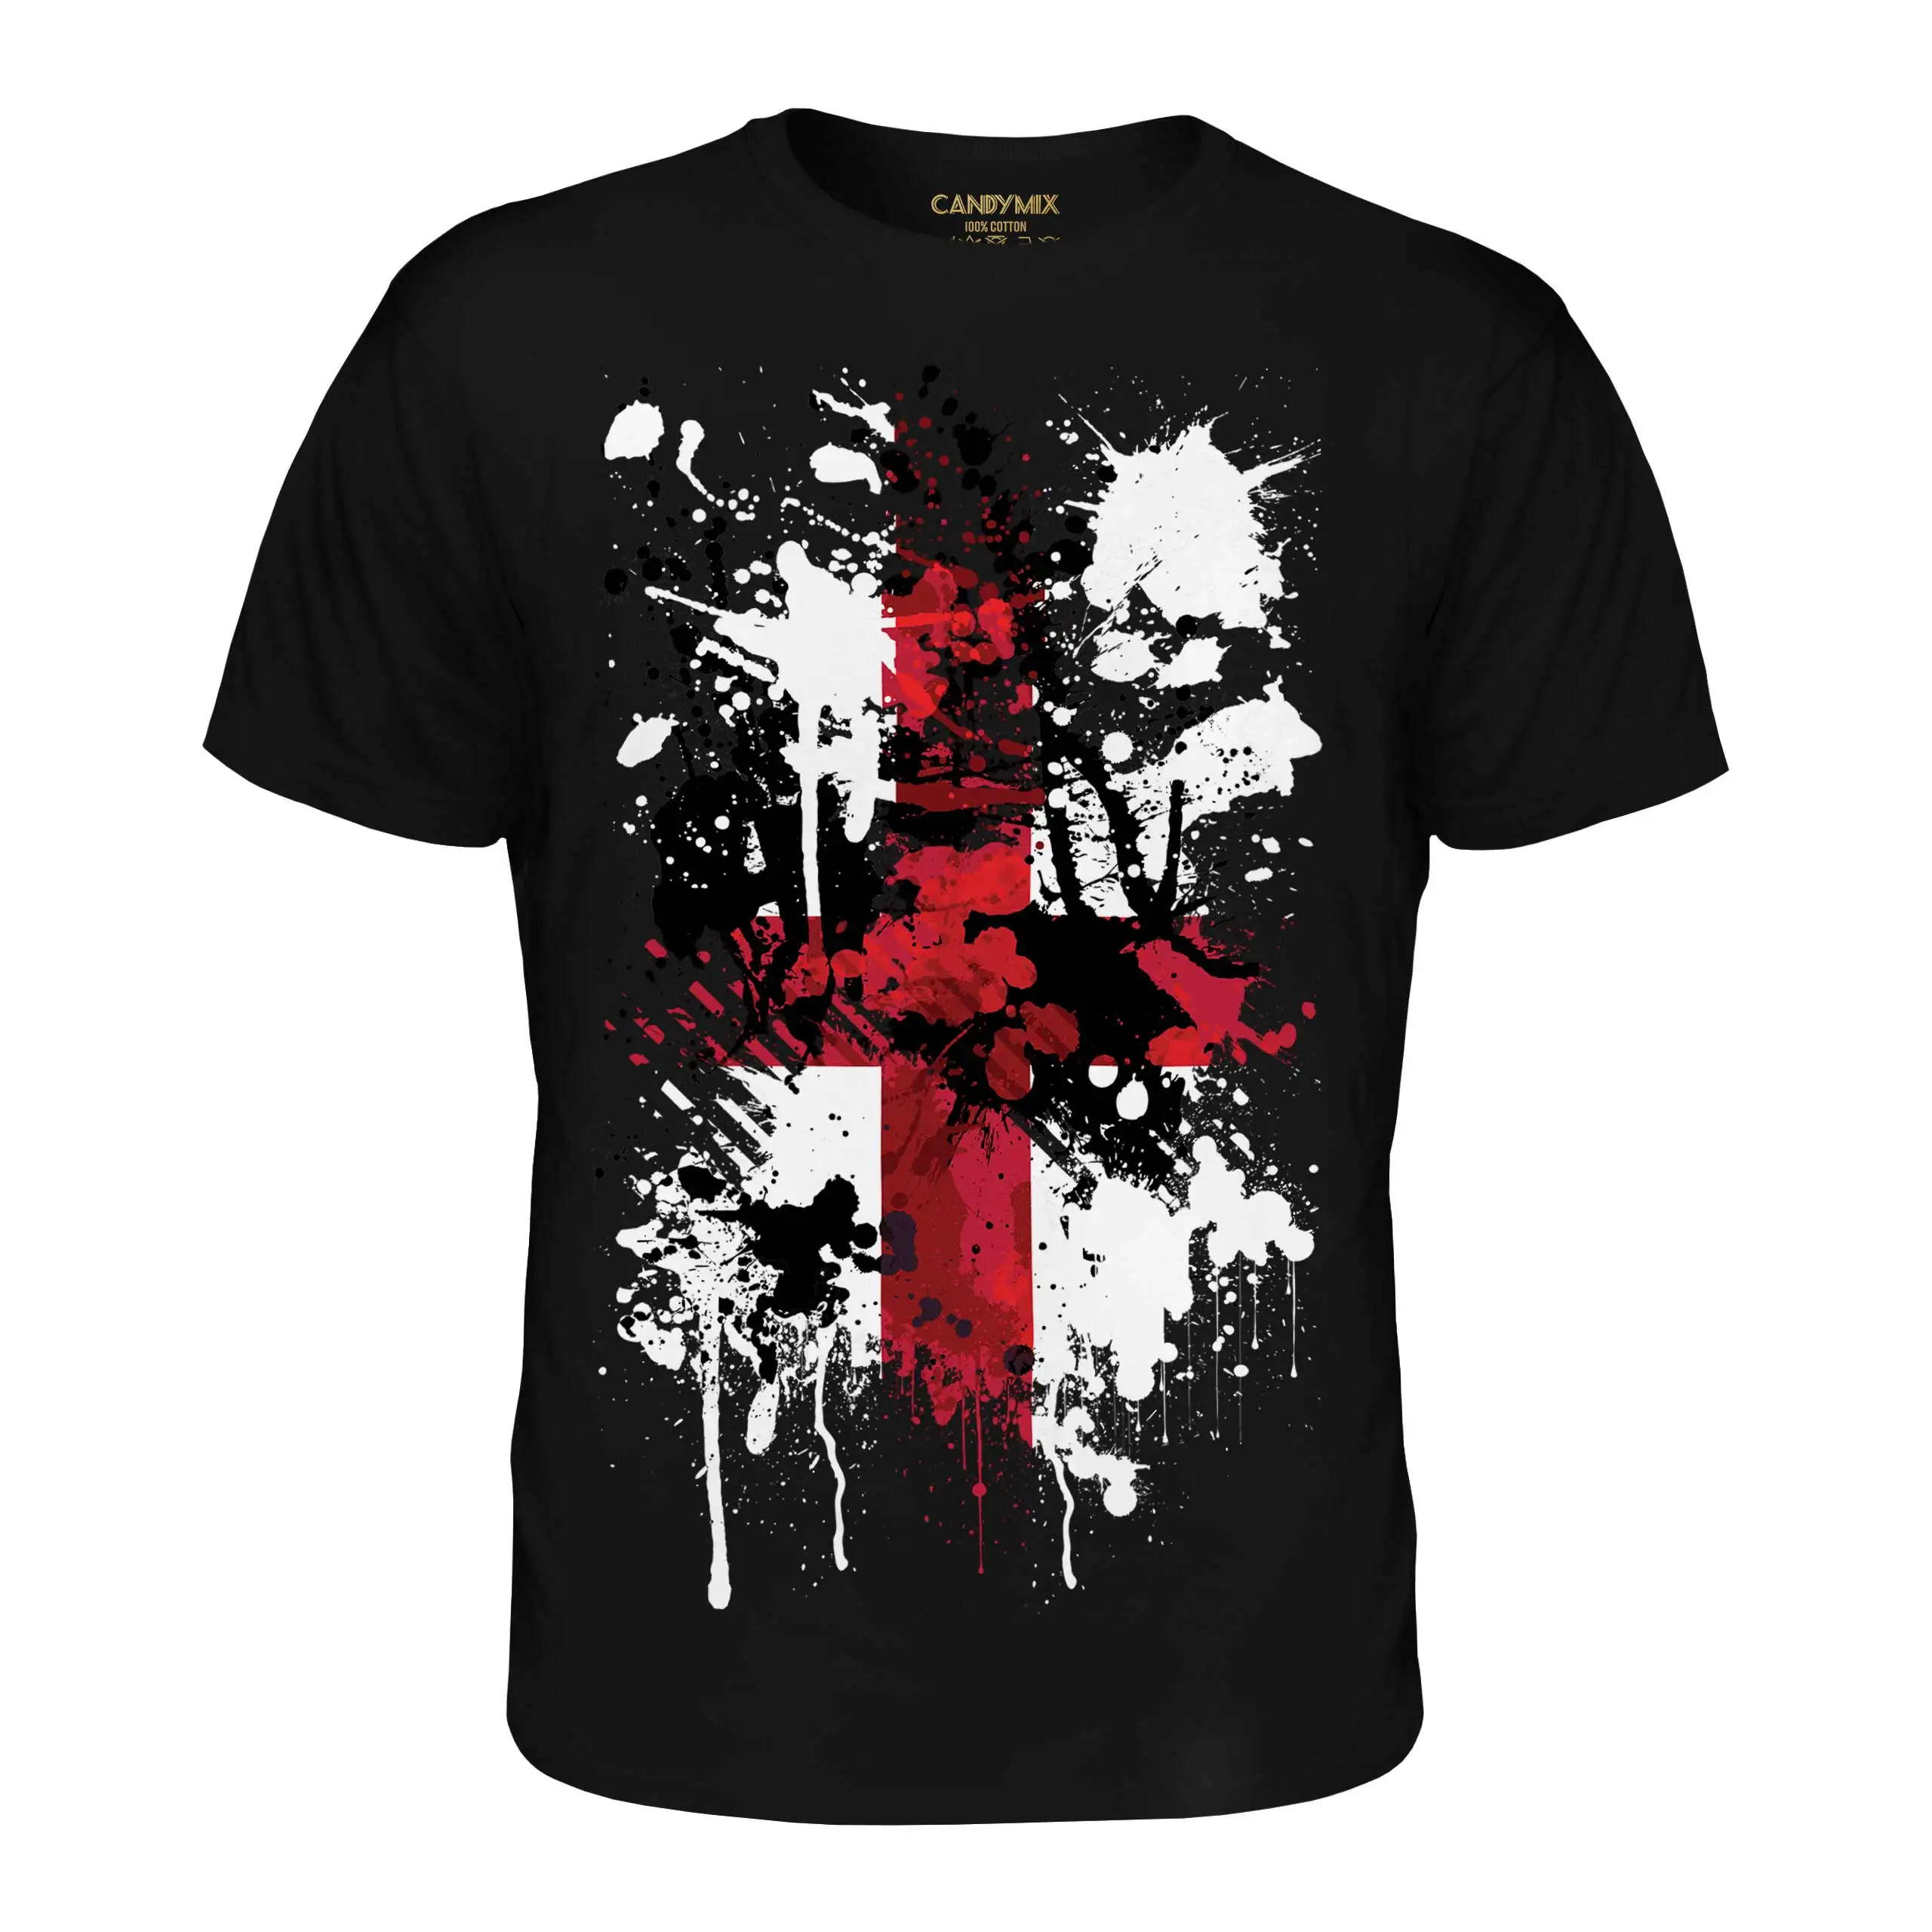 

England St George Cross English Flag Georges Day T-Shirt 100% Cotton O-Neck Summer Short Sleeve Casual Mens T-shirt Size S-3XL